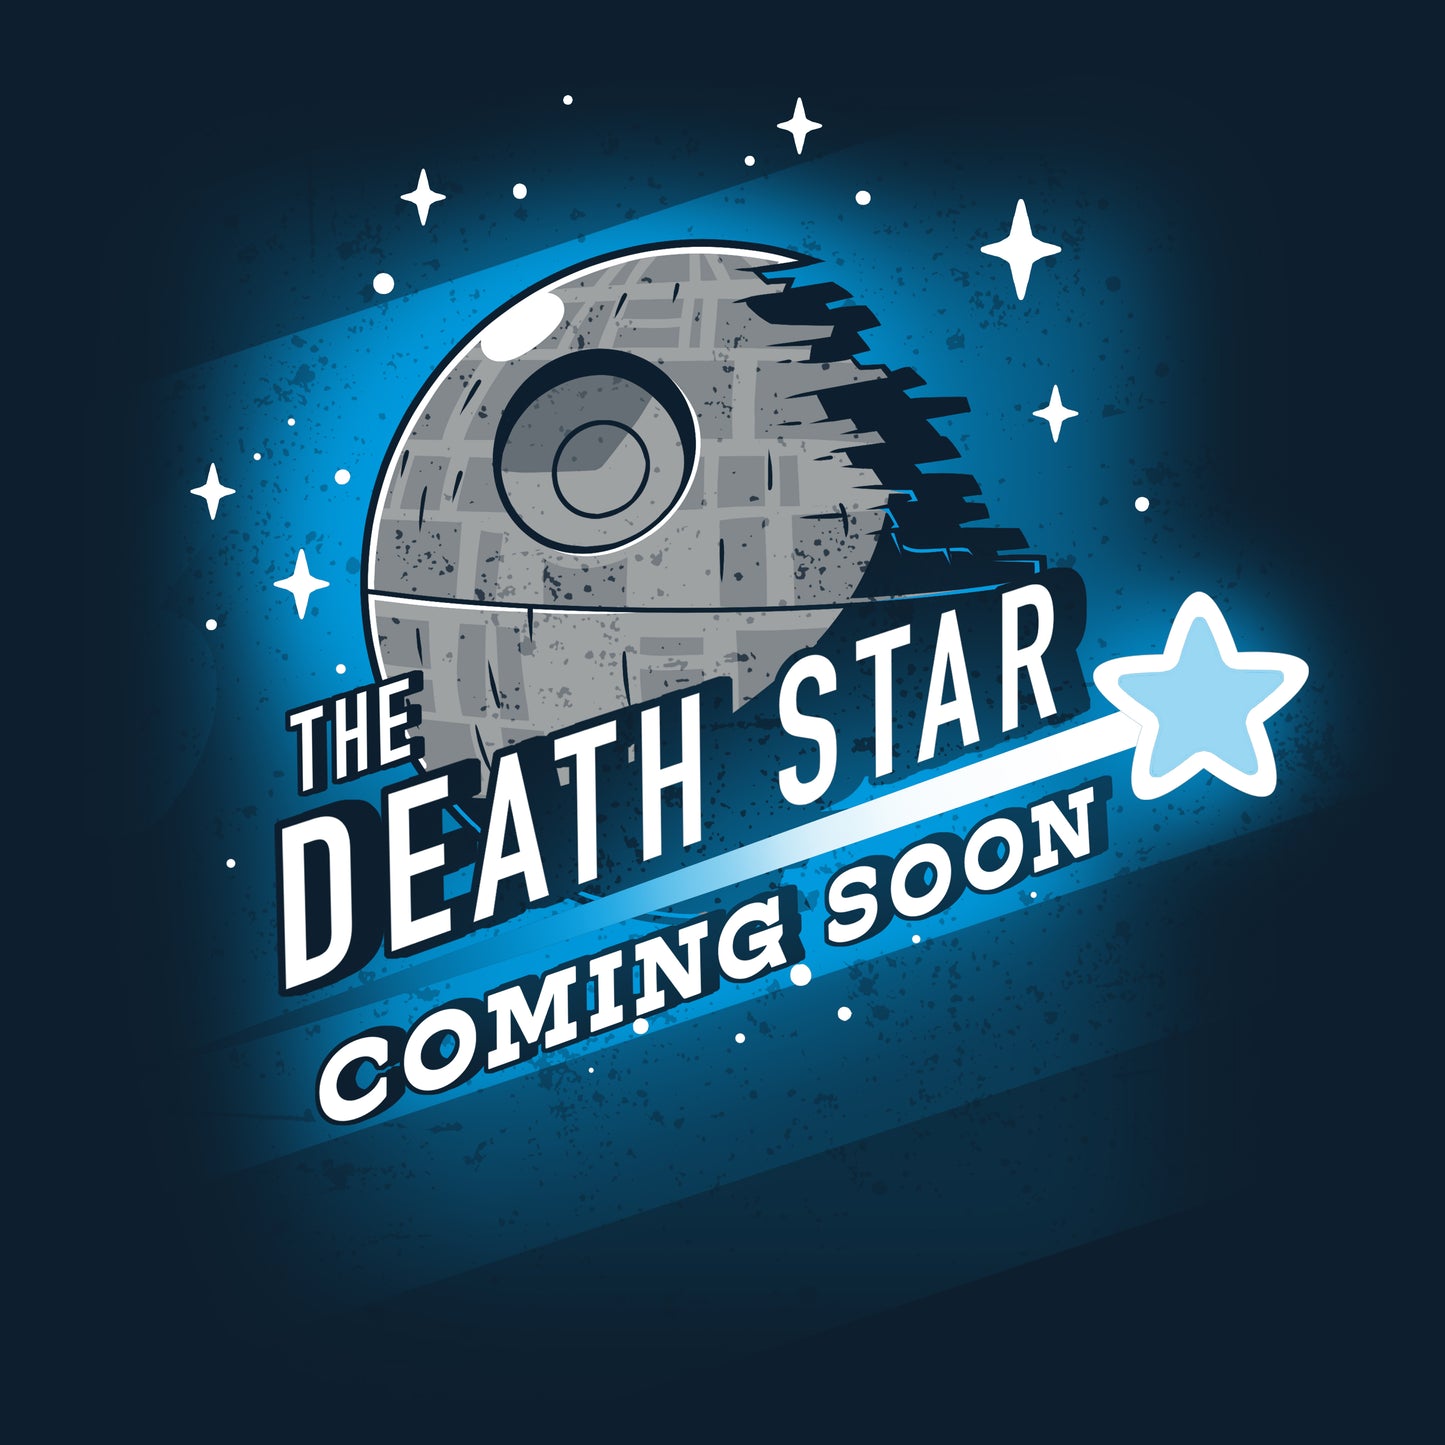 The officially licensed Star Wars Death Star logo.